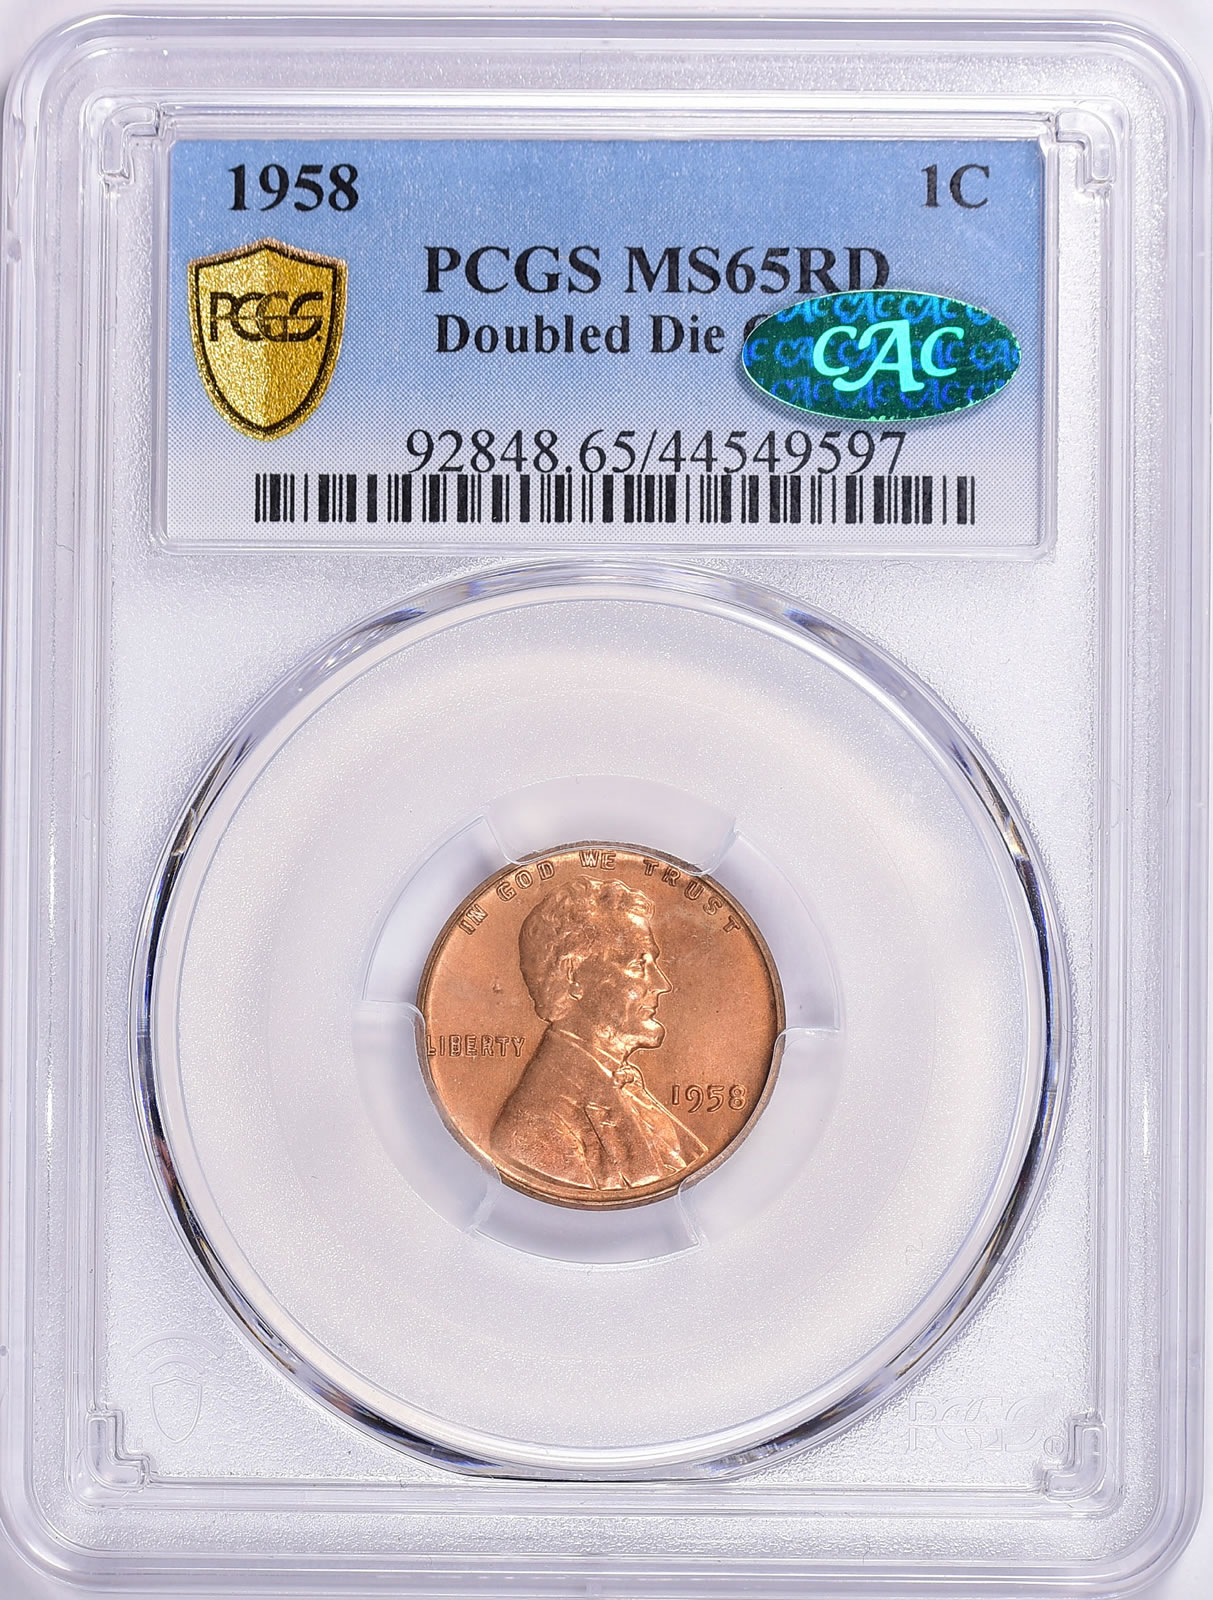 How Many 1943 Copper Pennies Were Made? - APMEX